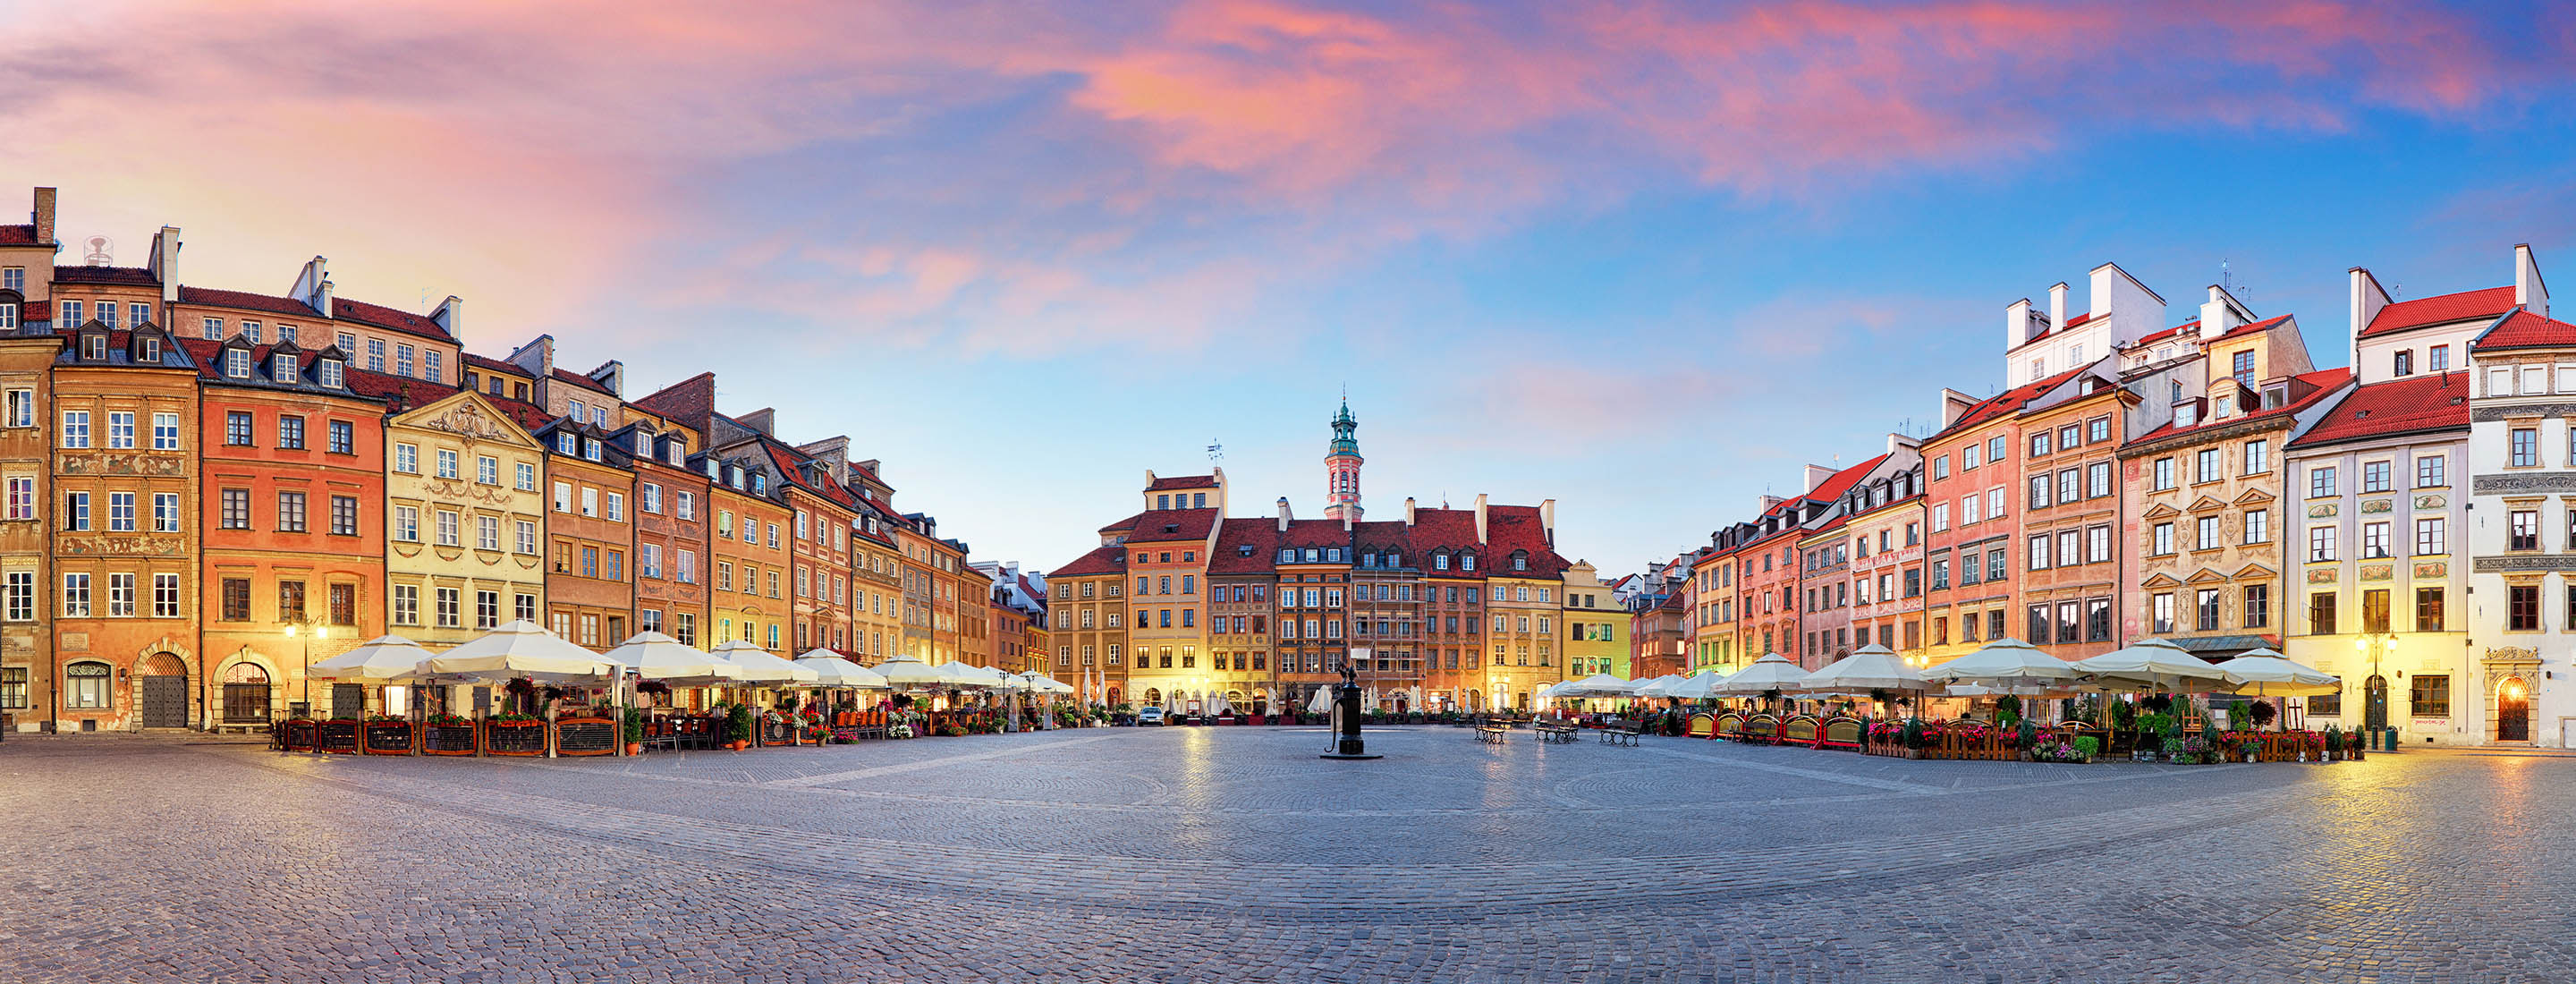 Warsaw attractions, Travel guide, Lux Express, Sightseeing, 2880x1100 Dual Screen Desktop